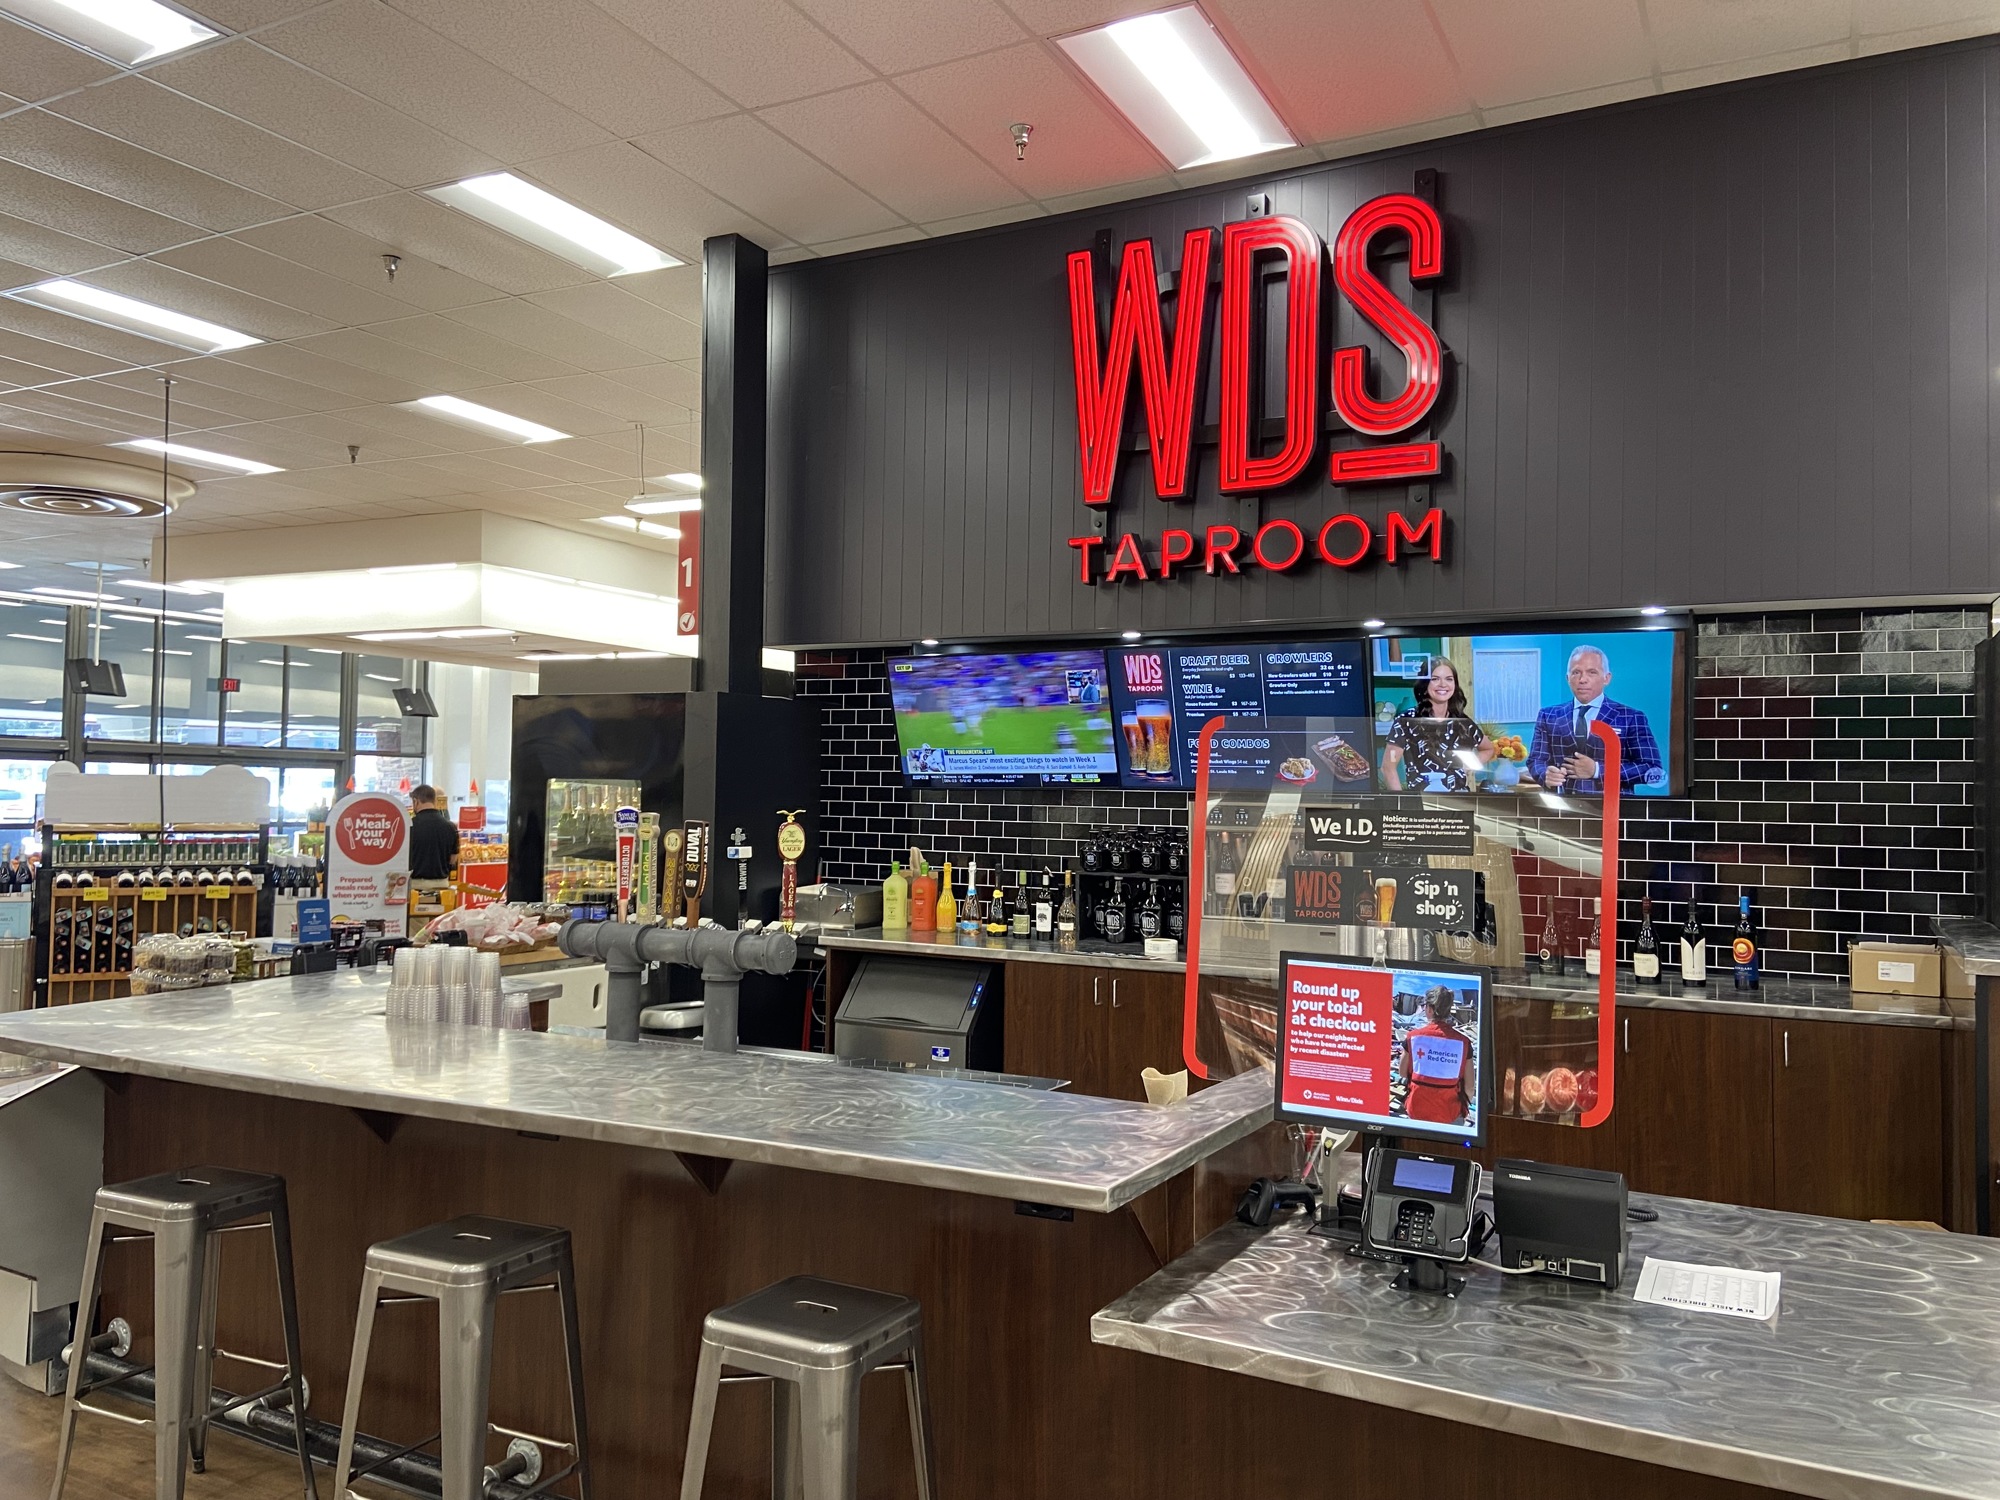 Winn-Dixie added a “sip and stroll” WDs Taproom in Ponte Vedra Beach.